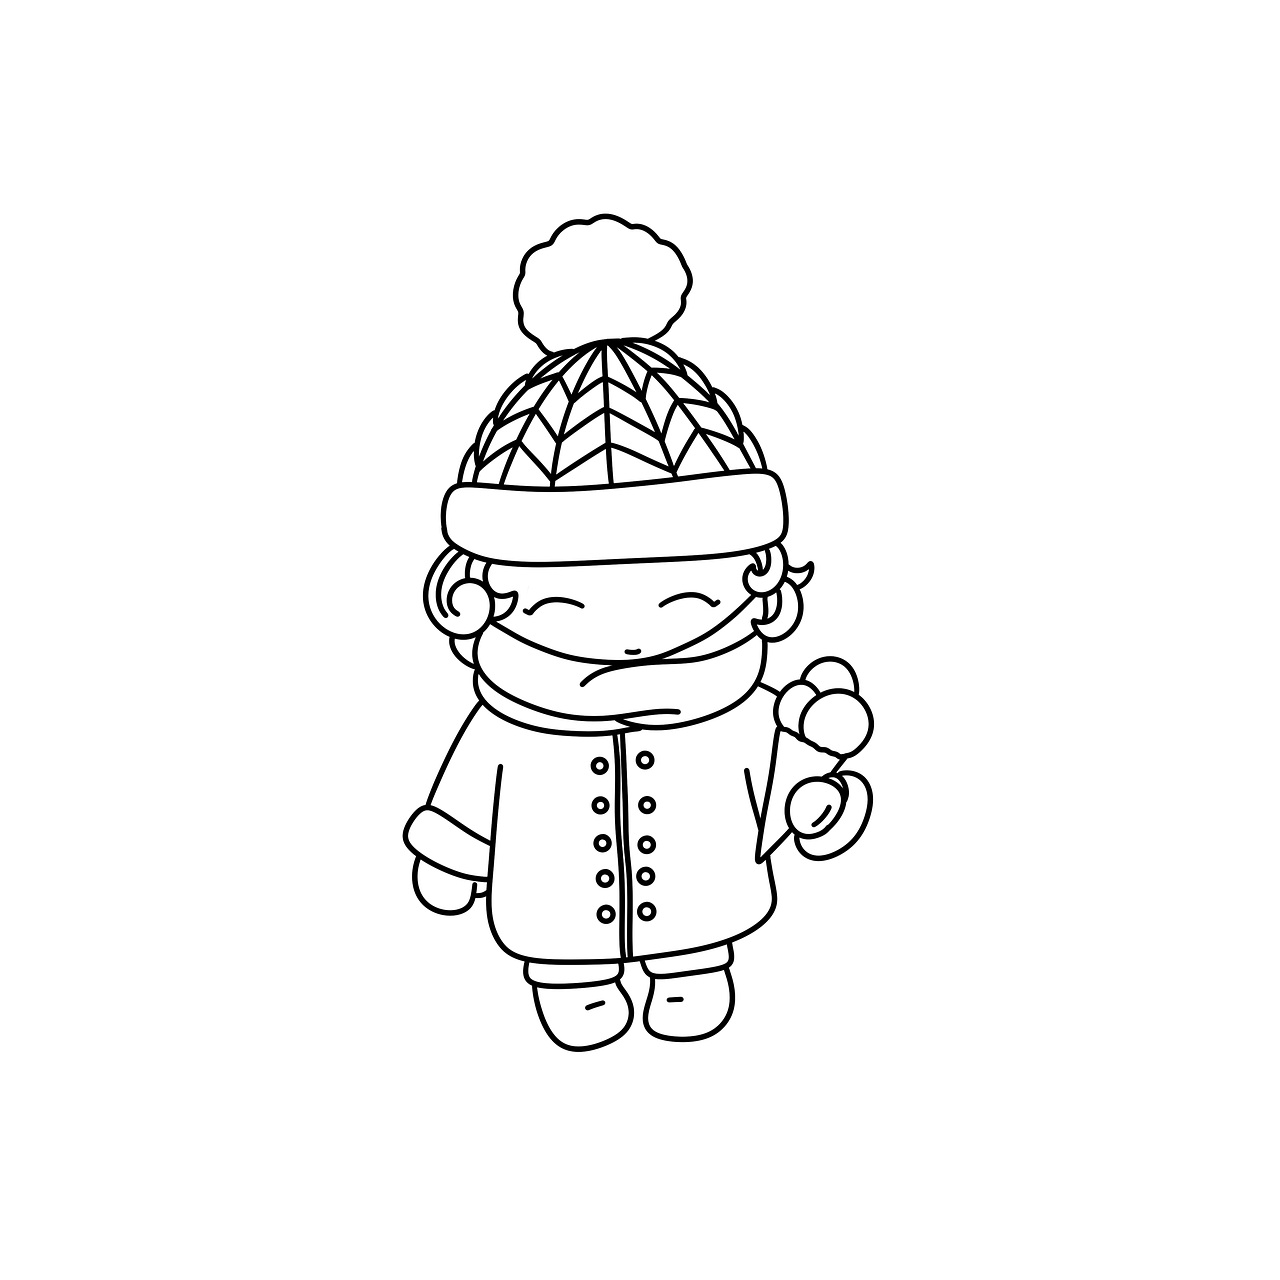 a person in a hat and coat holding an apple, lineart, by Kanbun Master, pexels, (3 are winter, cute toy, black and white vector, traditional drawing style